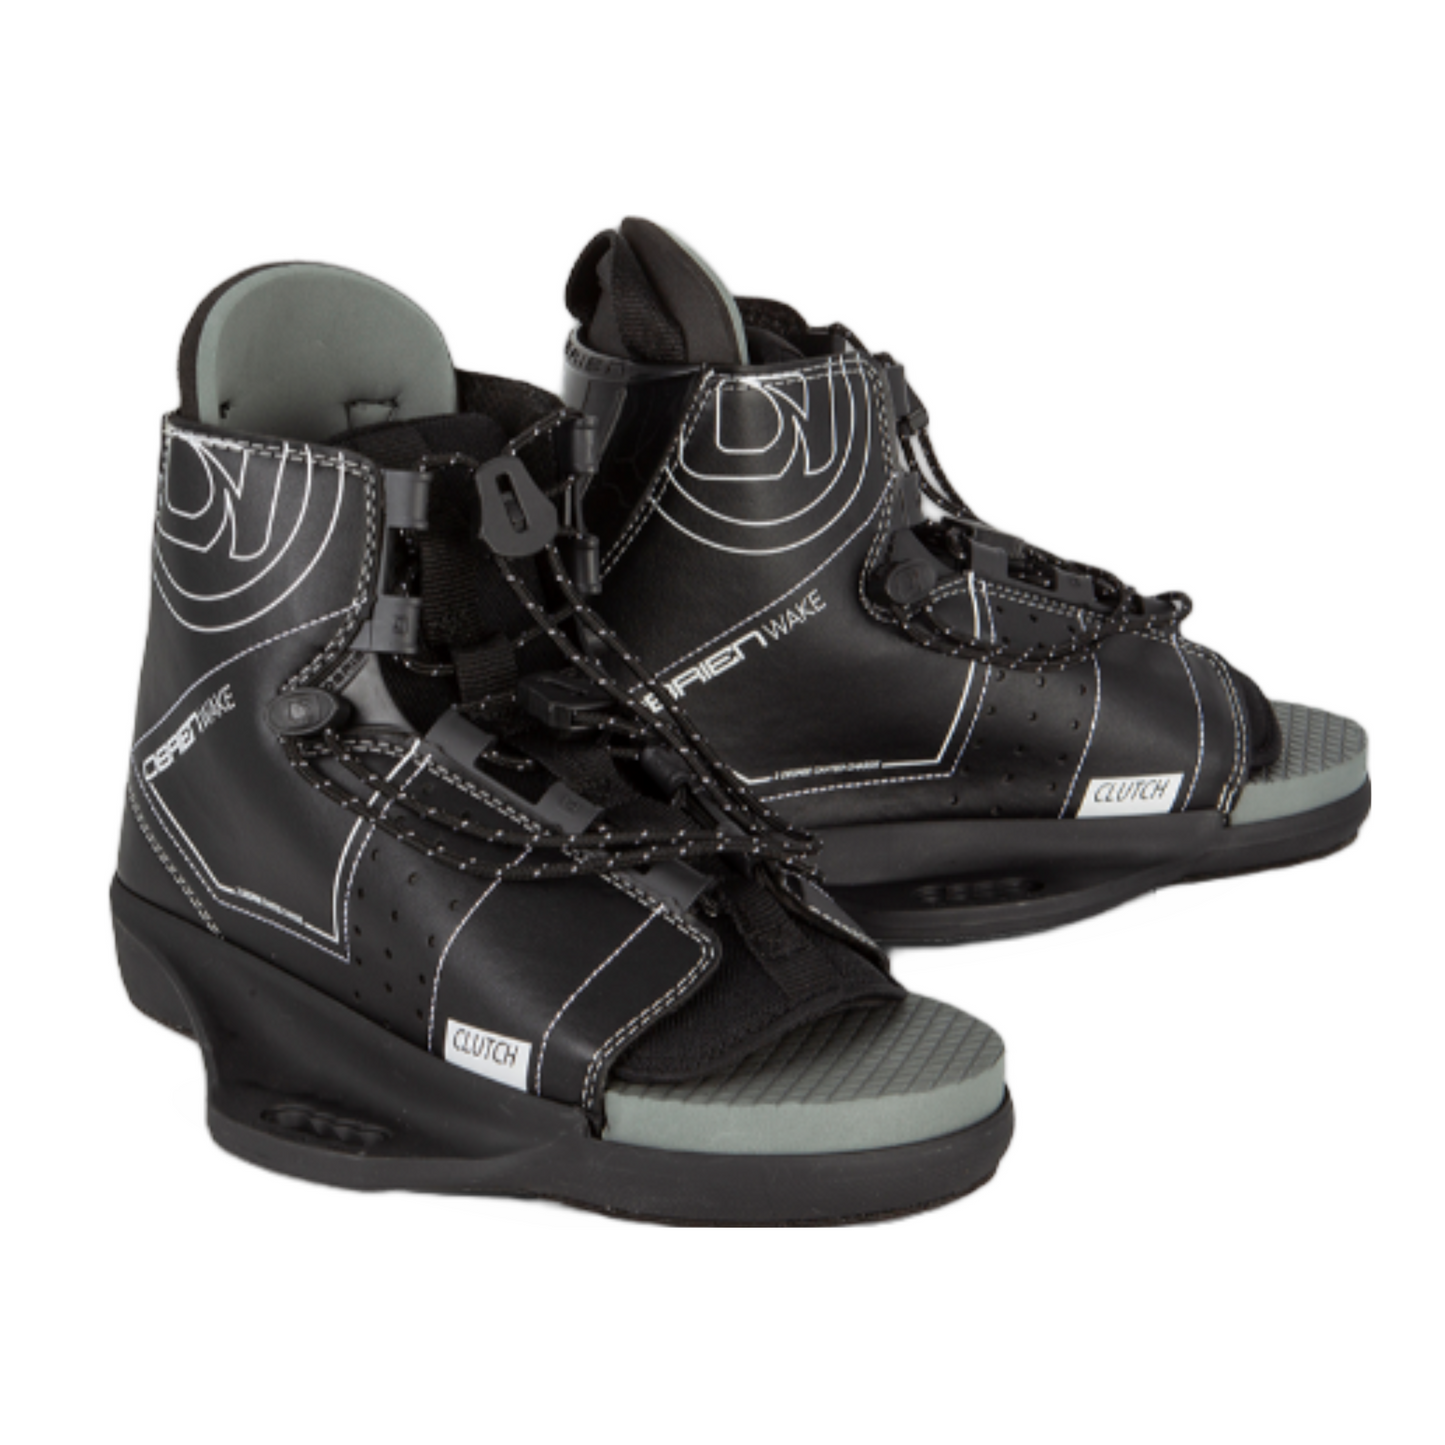 O'Brien Clutch wakeboard boots in black and silver